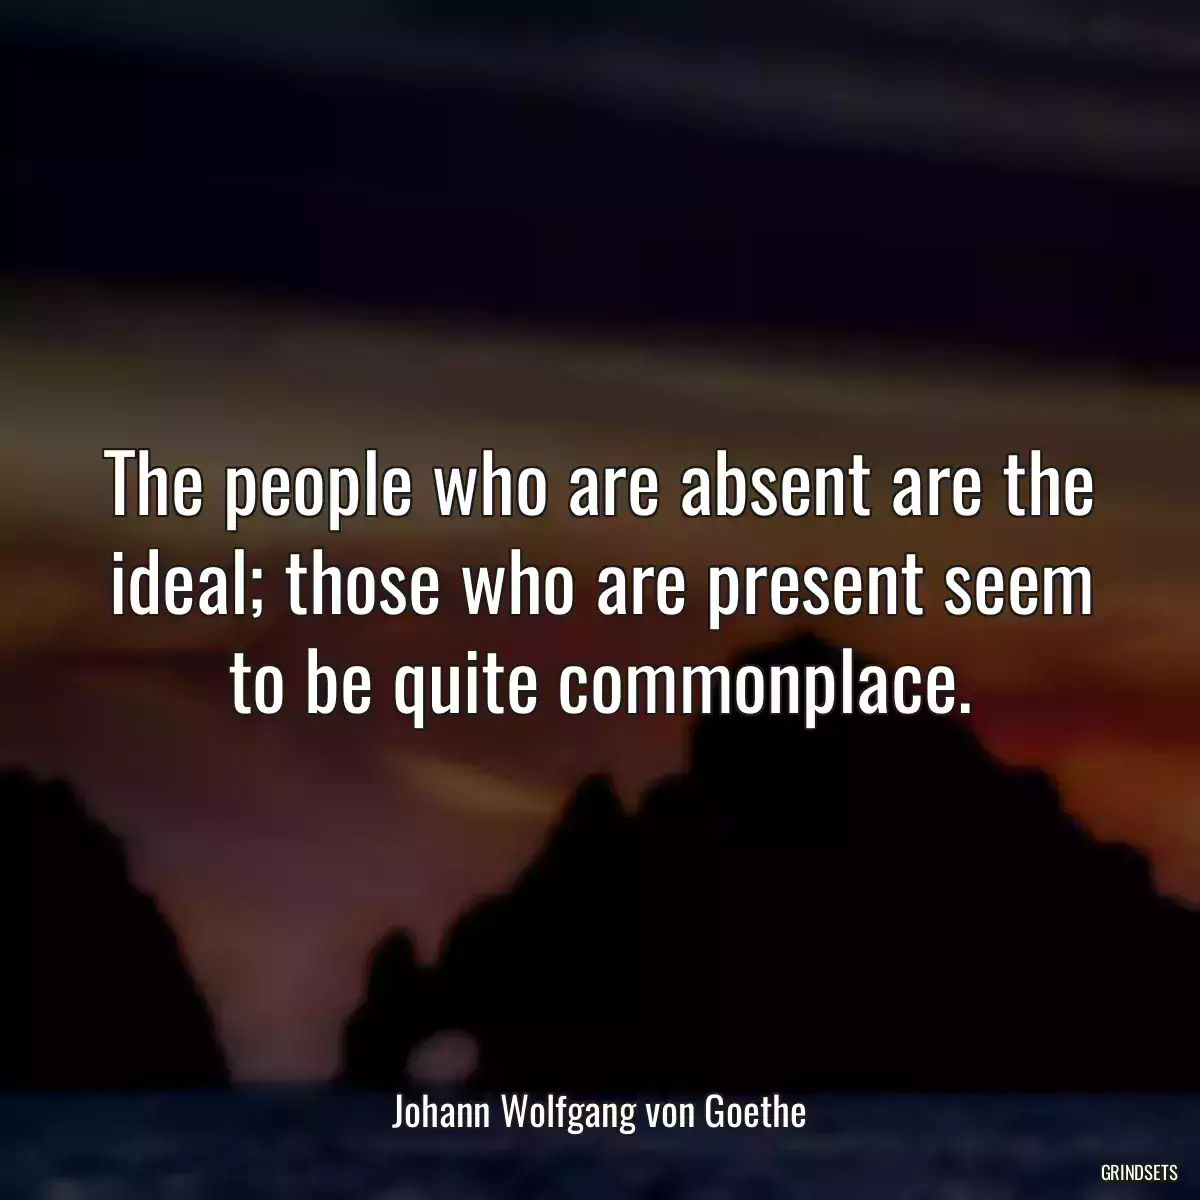 The people who are absent are the ideal; those who are present seem to be quite commonplace.